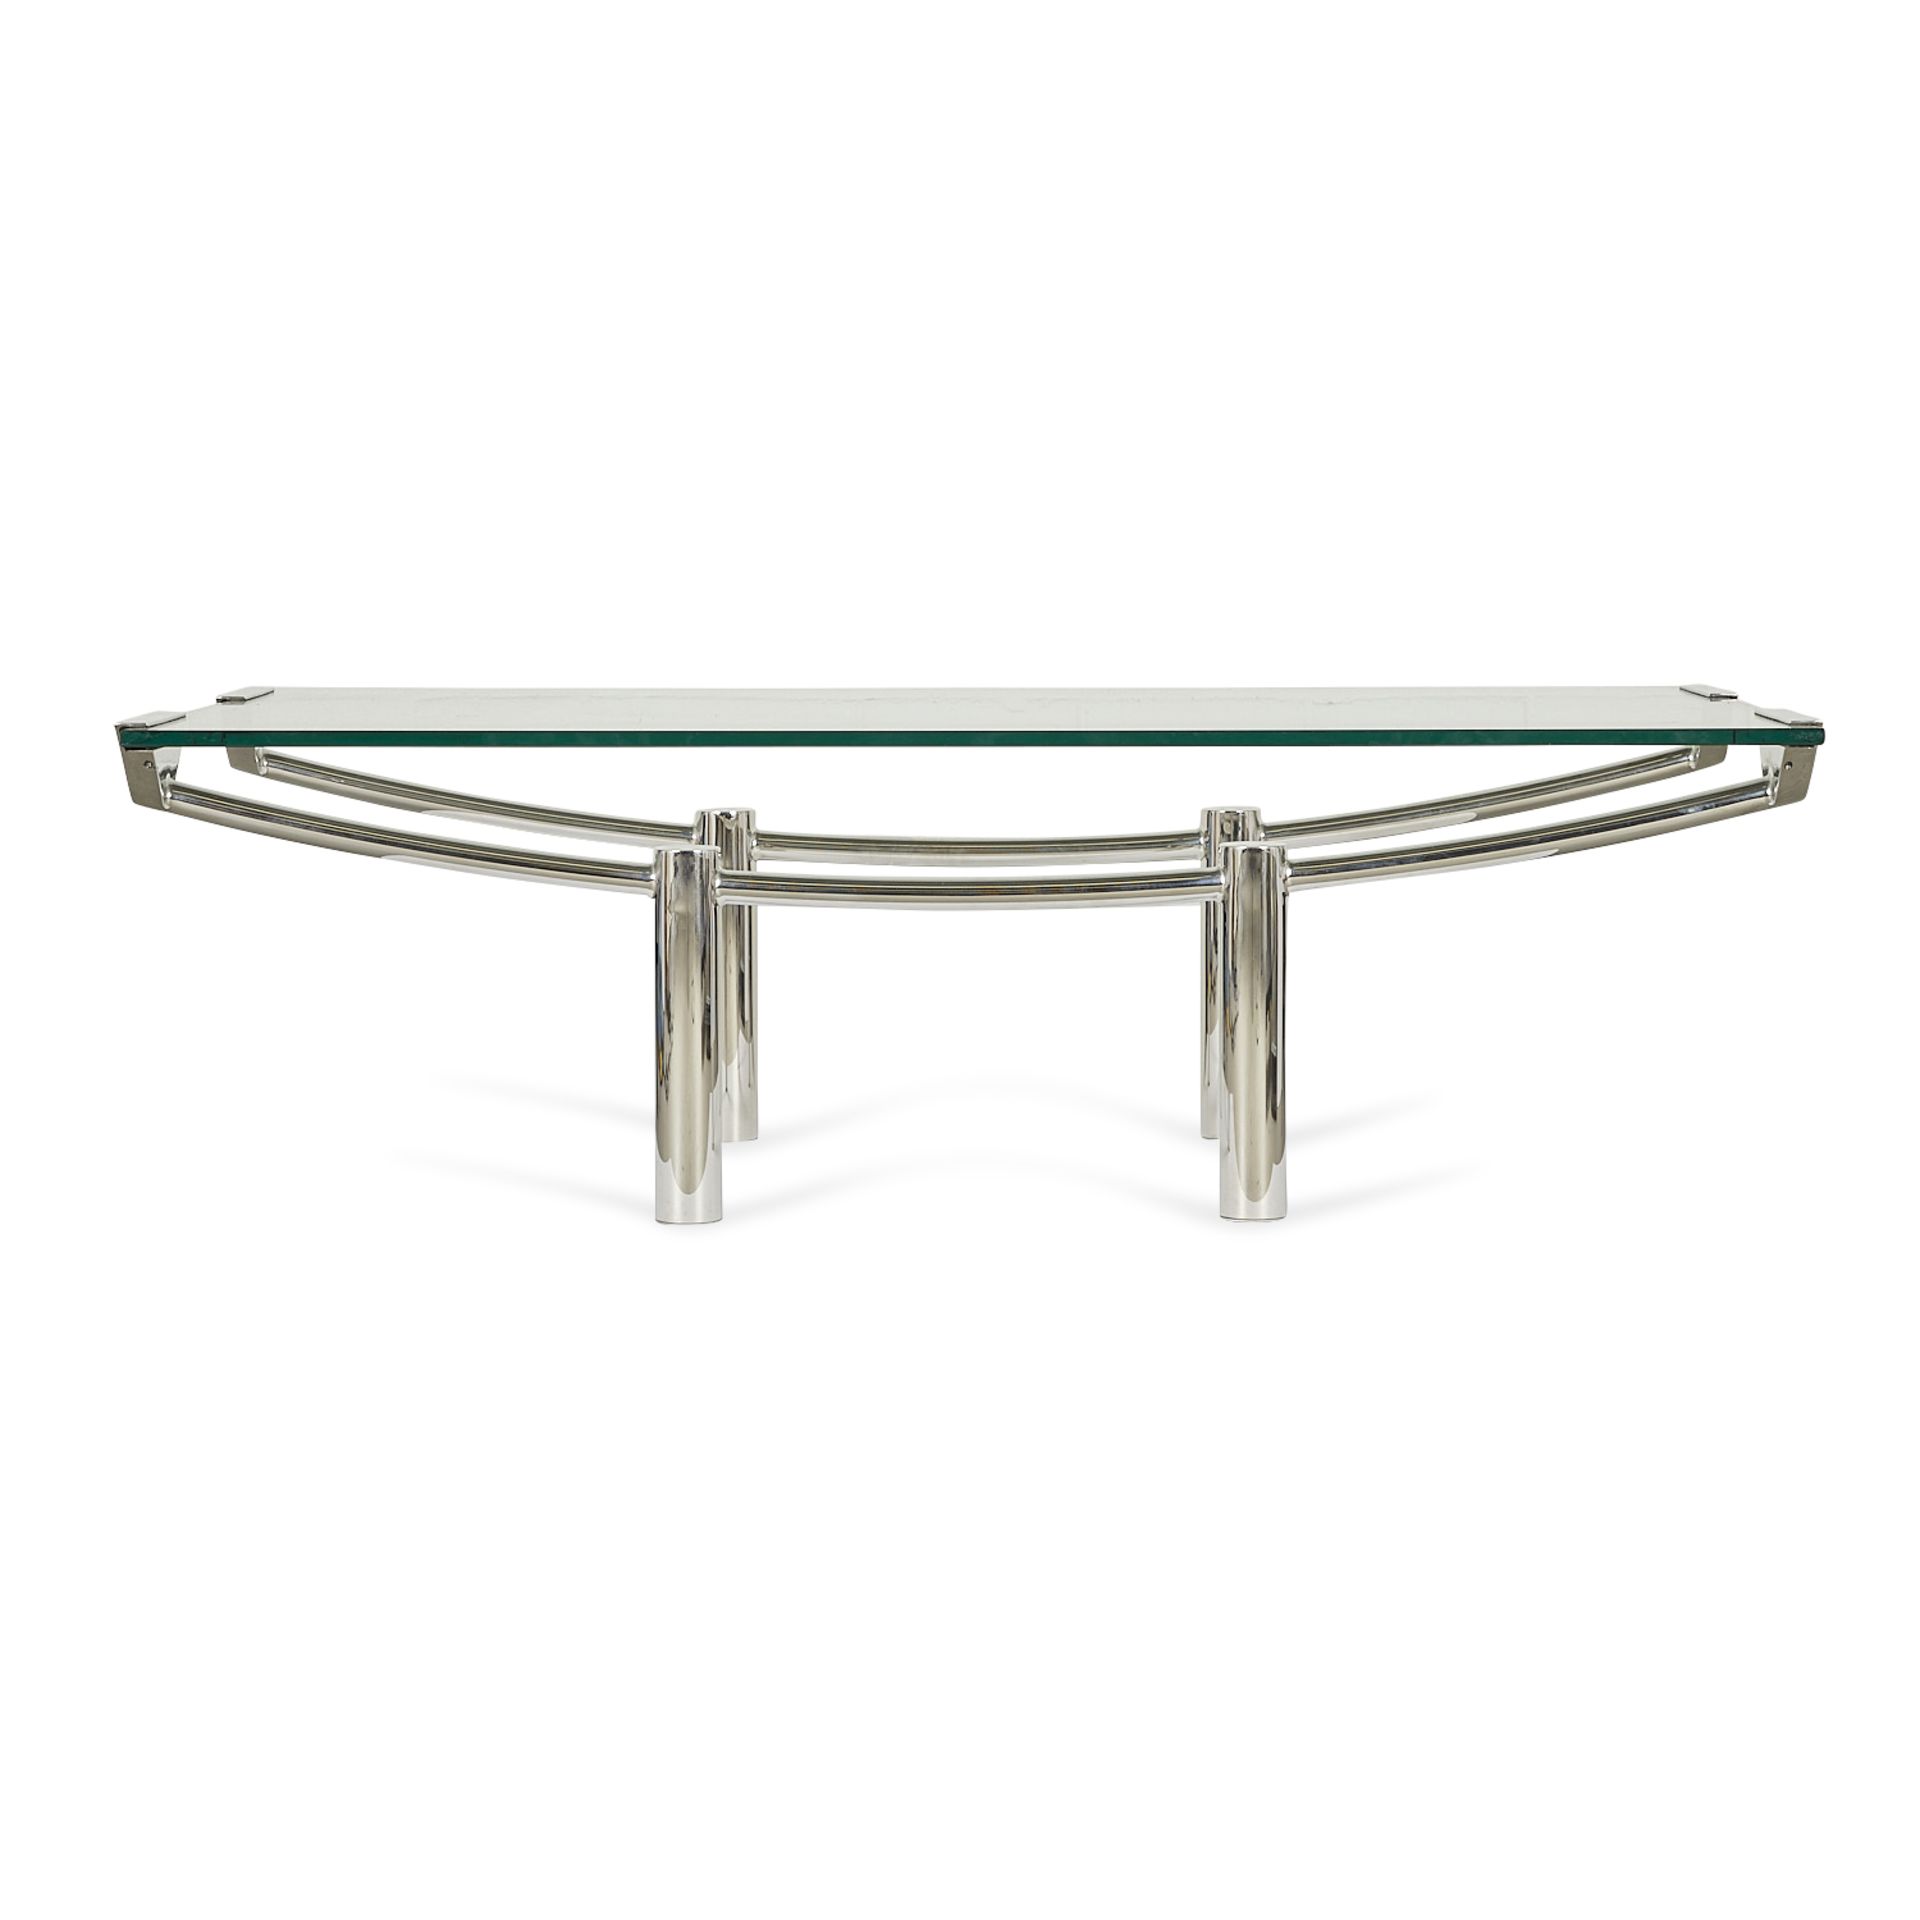 Brueton "Structures" Low Coffee Table w/ Glass Top - Image 3 of 12